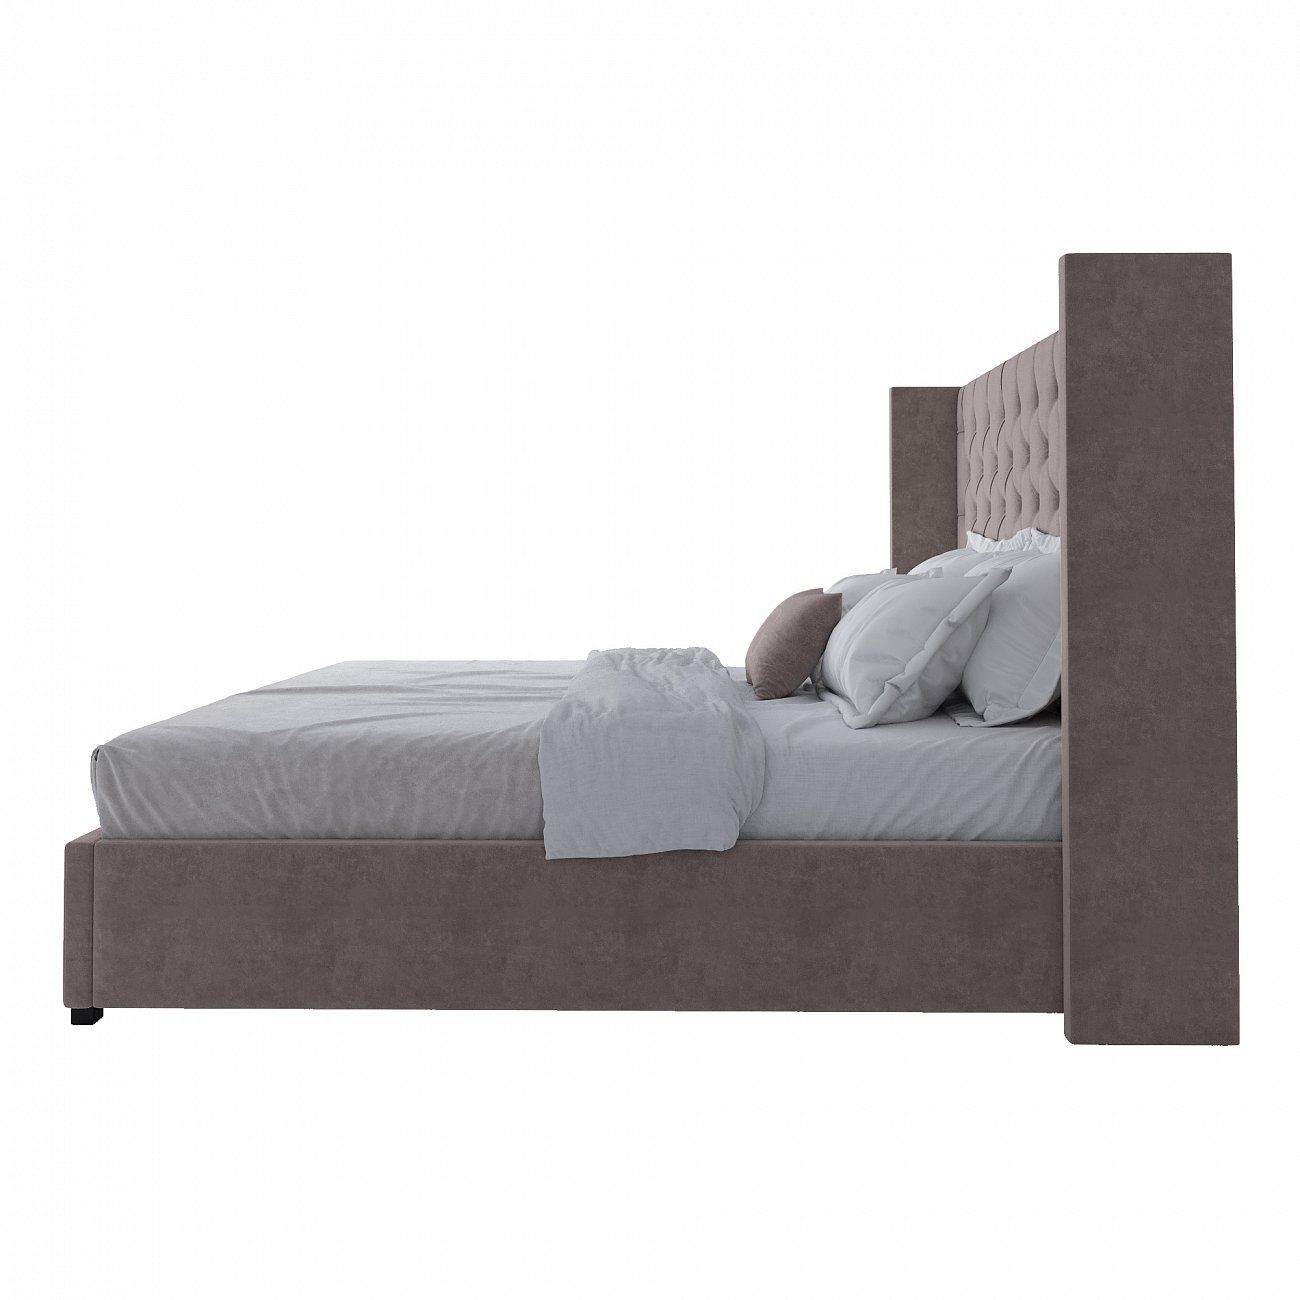 Double bed 200x200 cm gray-brown with carriage screed without studs Wing-2